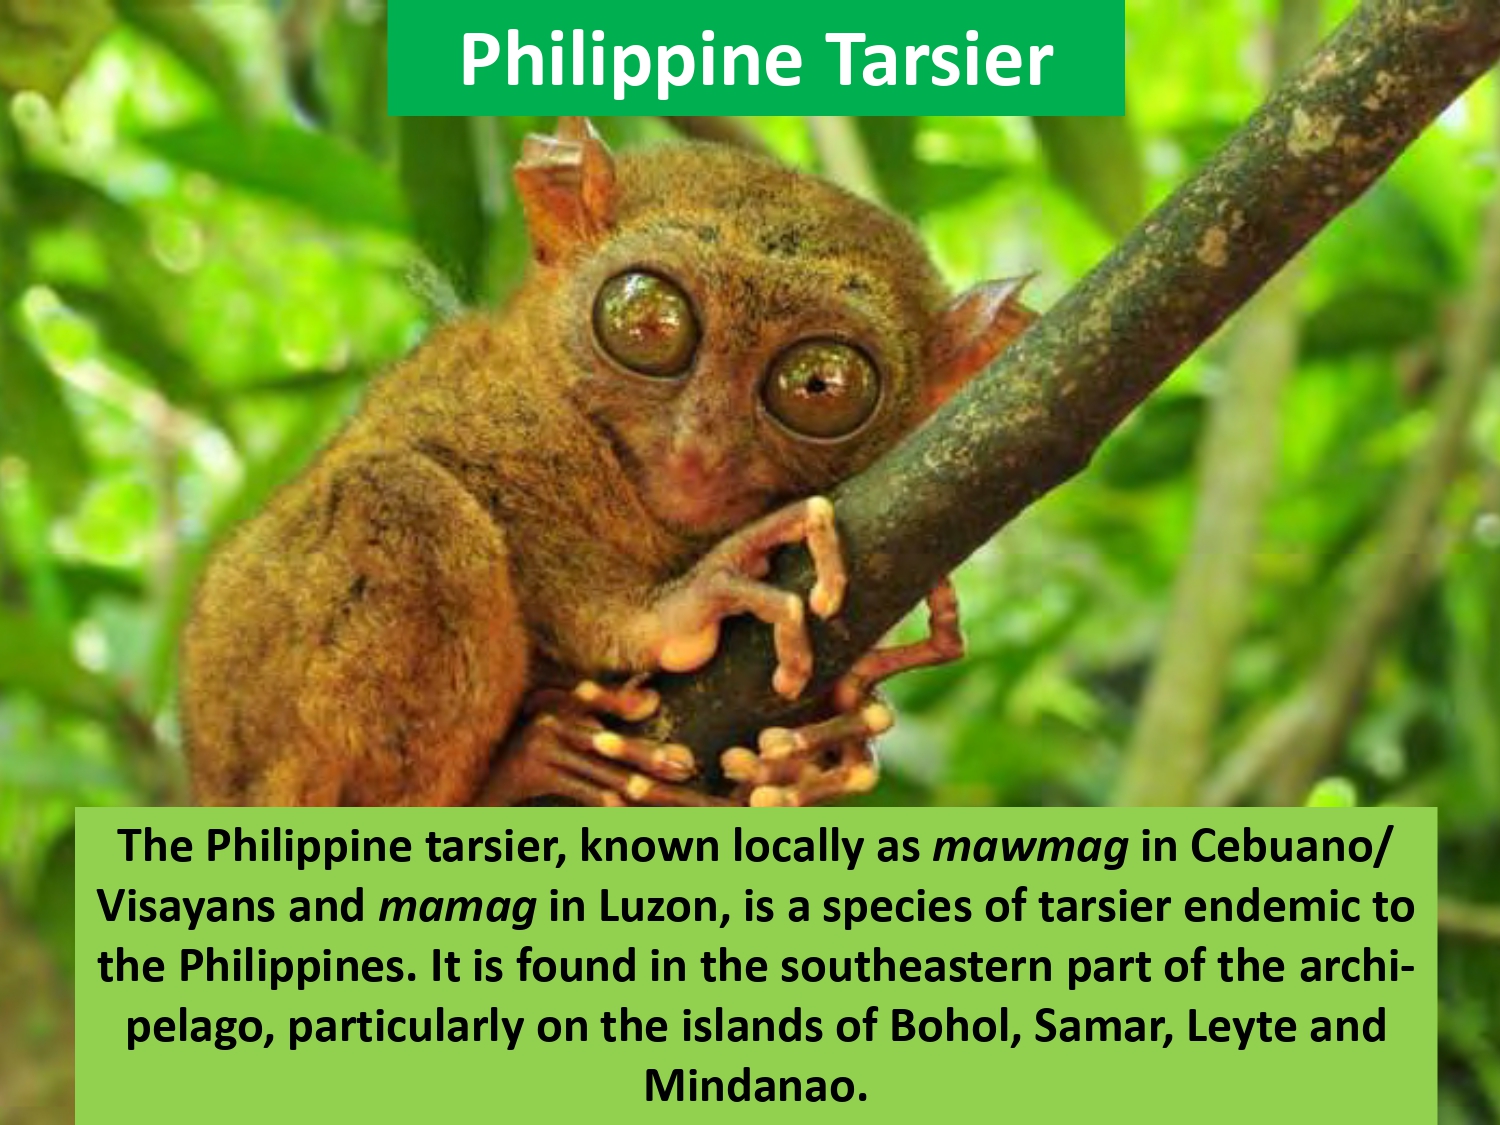 The Philippine tarsier, known locally as mawmag in Cebuano/ Visayans and mamag in Luzon, is a species of tarsier endemic to the Philippines. It is found in the southeastern part of the archipelago, particularly on the islands of Bohol, Samar, Leyte and Mindanao.